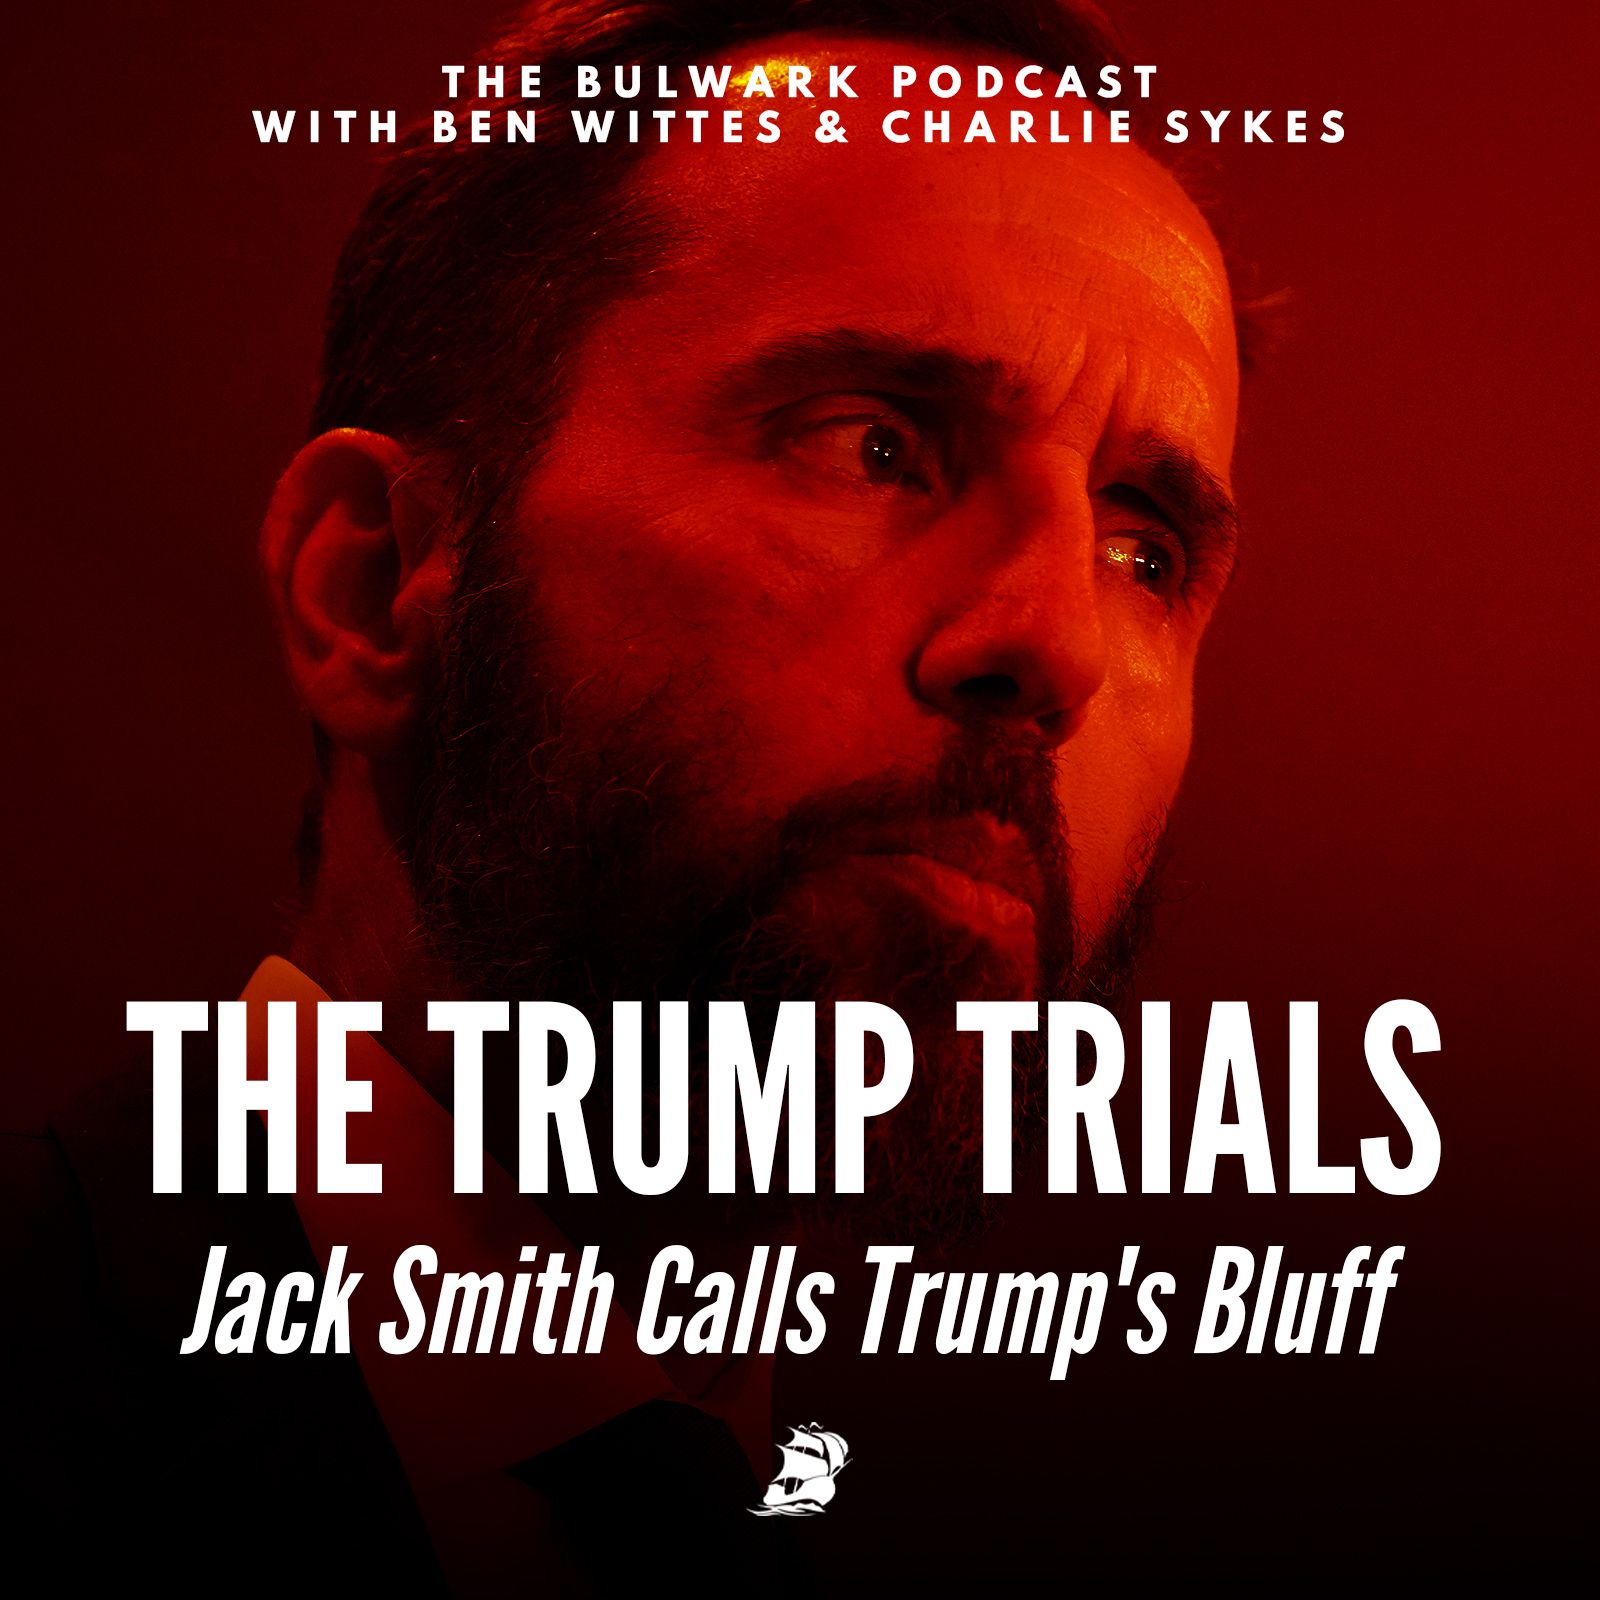 Jack Smith Calls Trump's Bluff by The Bulwark Podcast